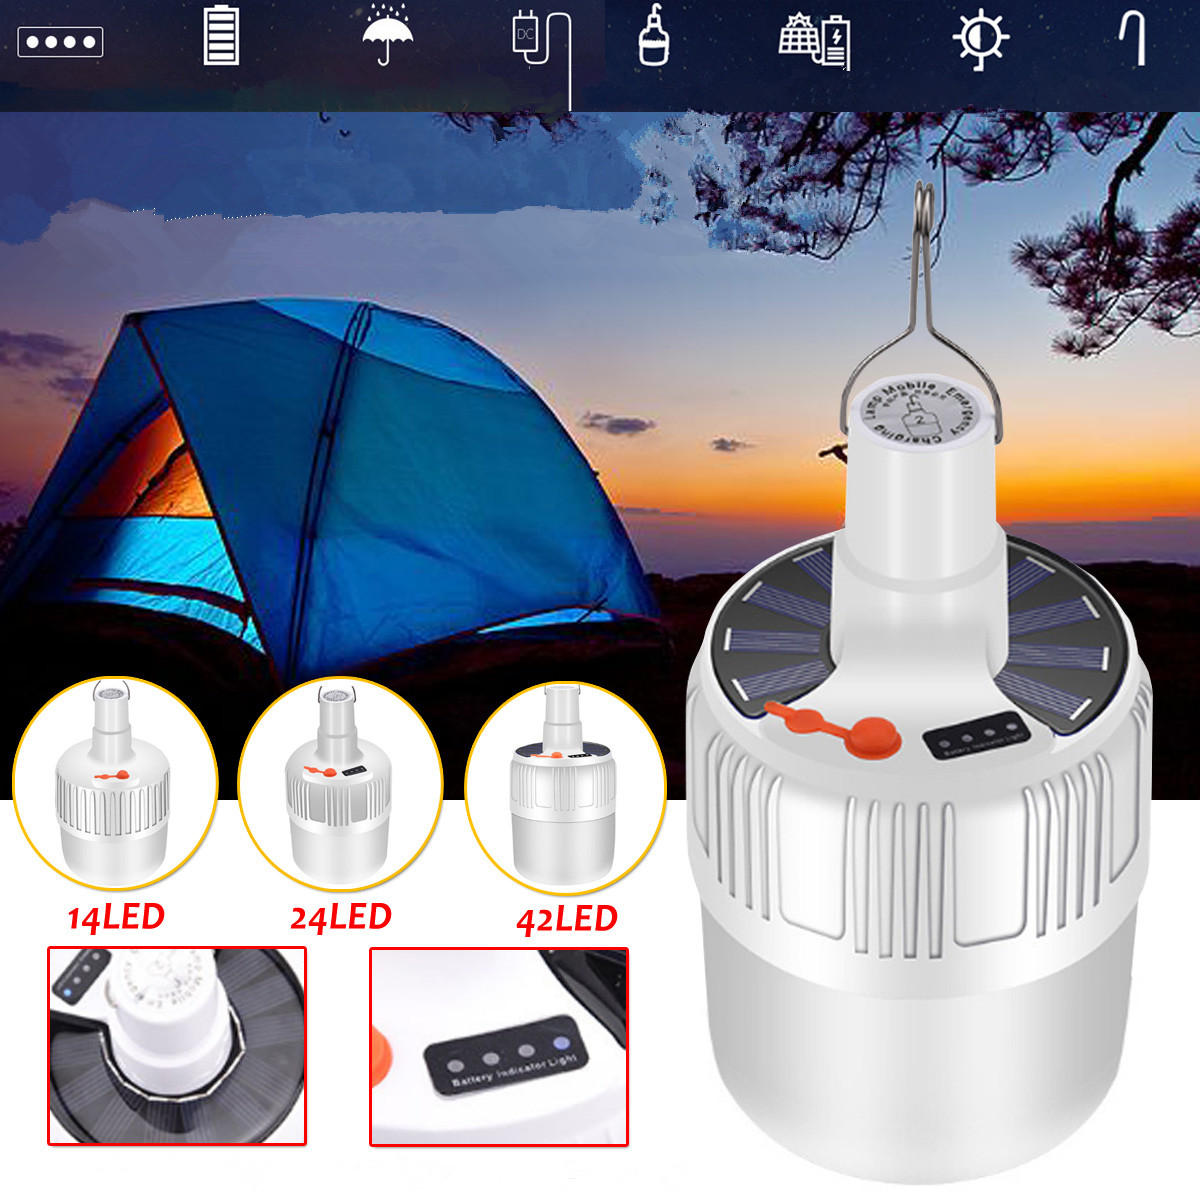 USB Rechargeable LED Bulb Waterproof 5 Modes Solar Light Outdoor Camping Emergency Light